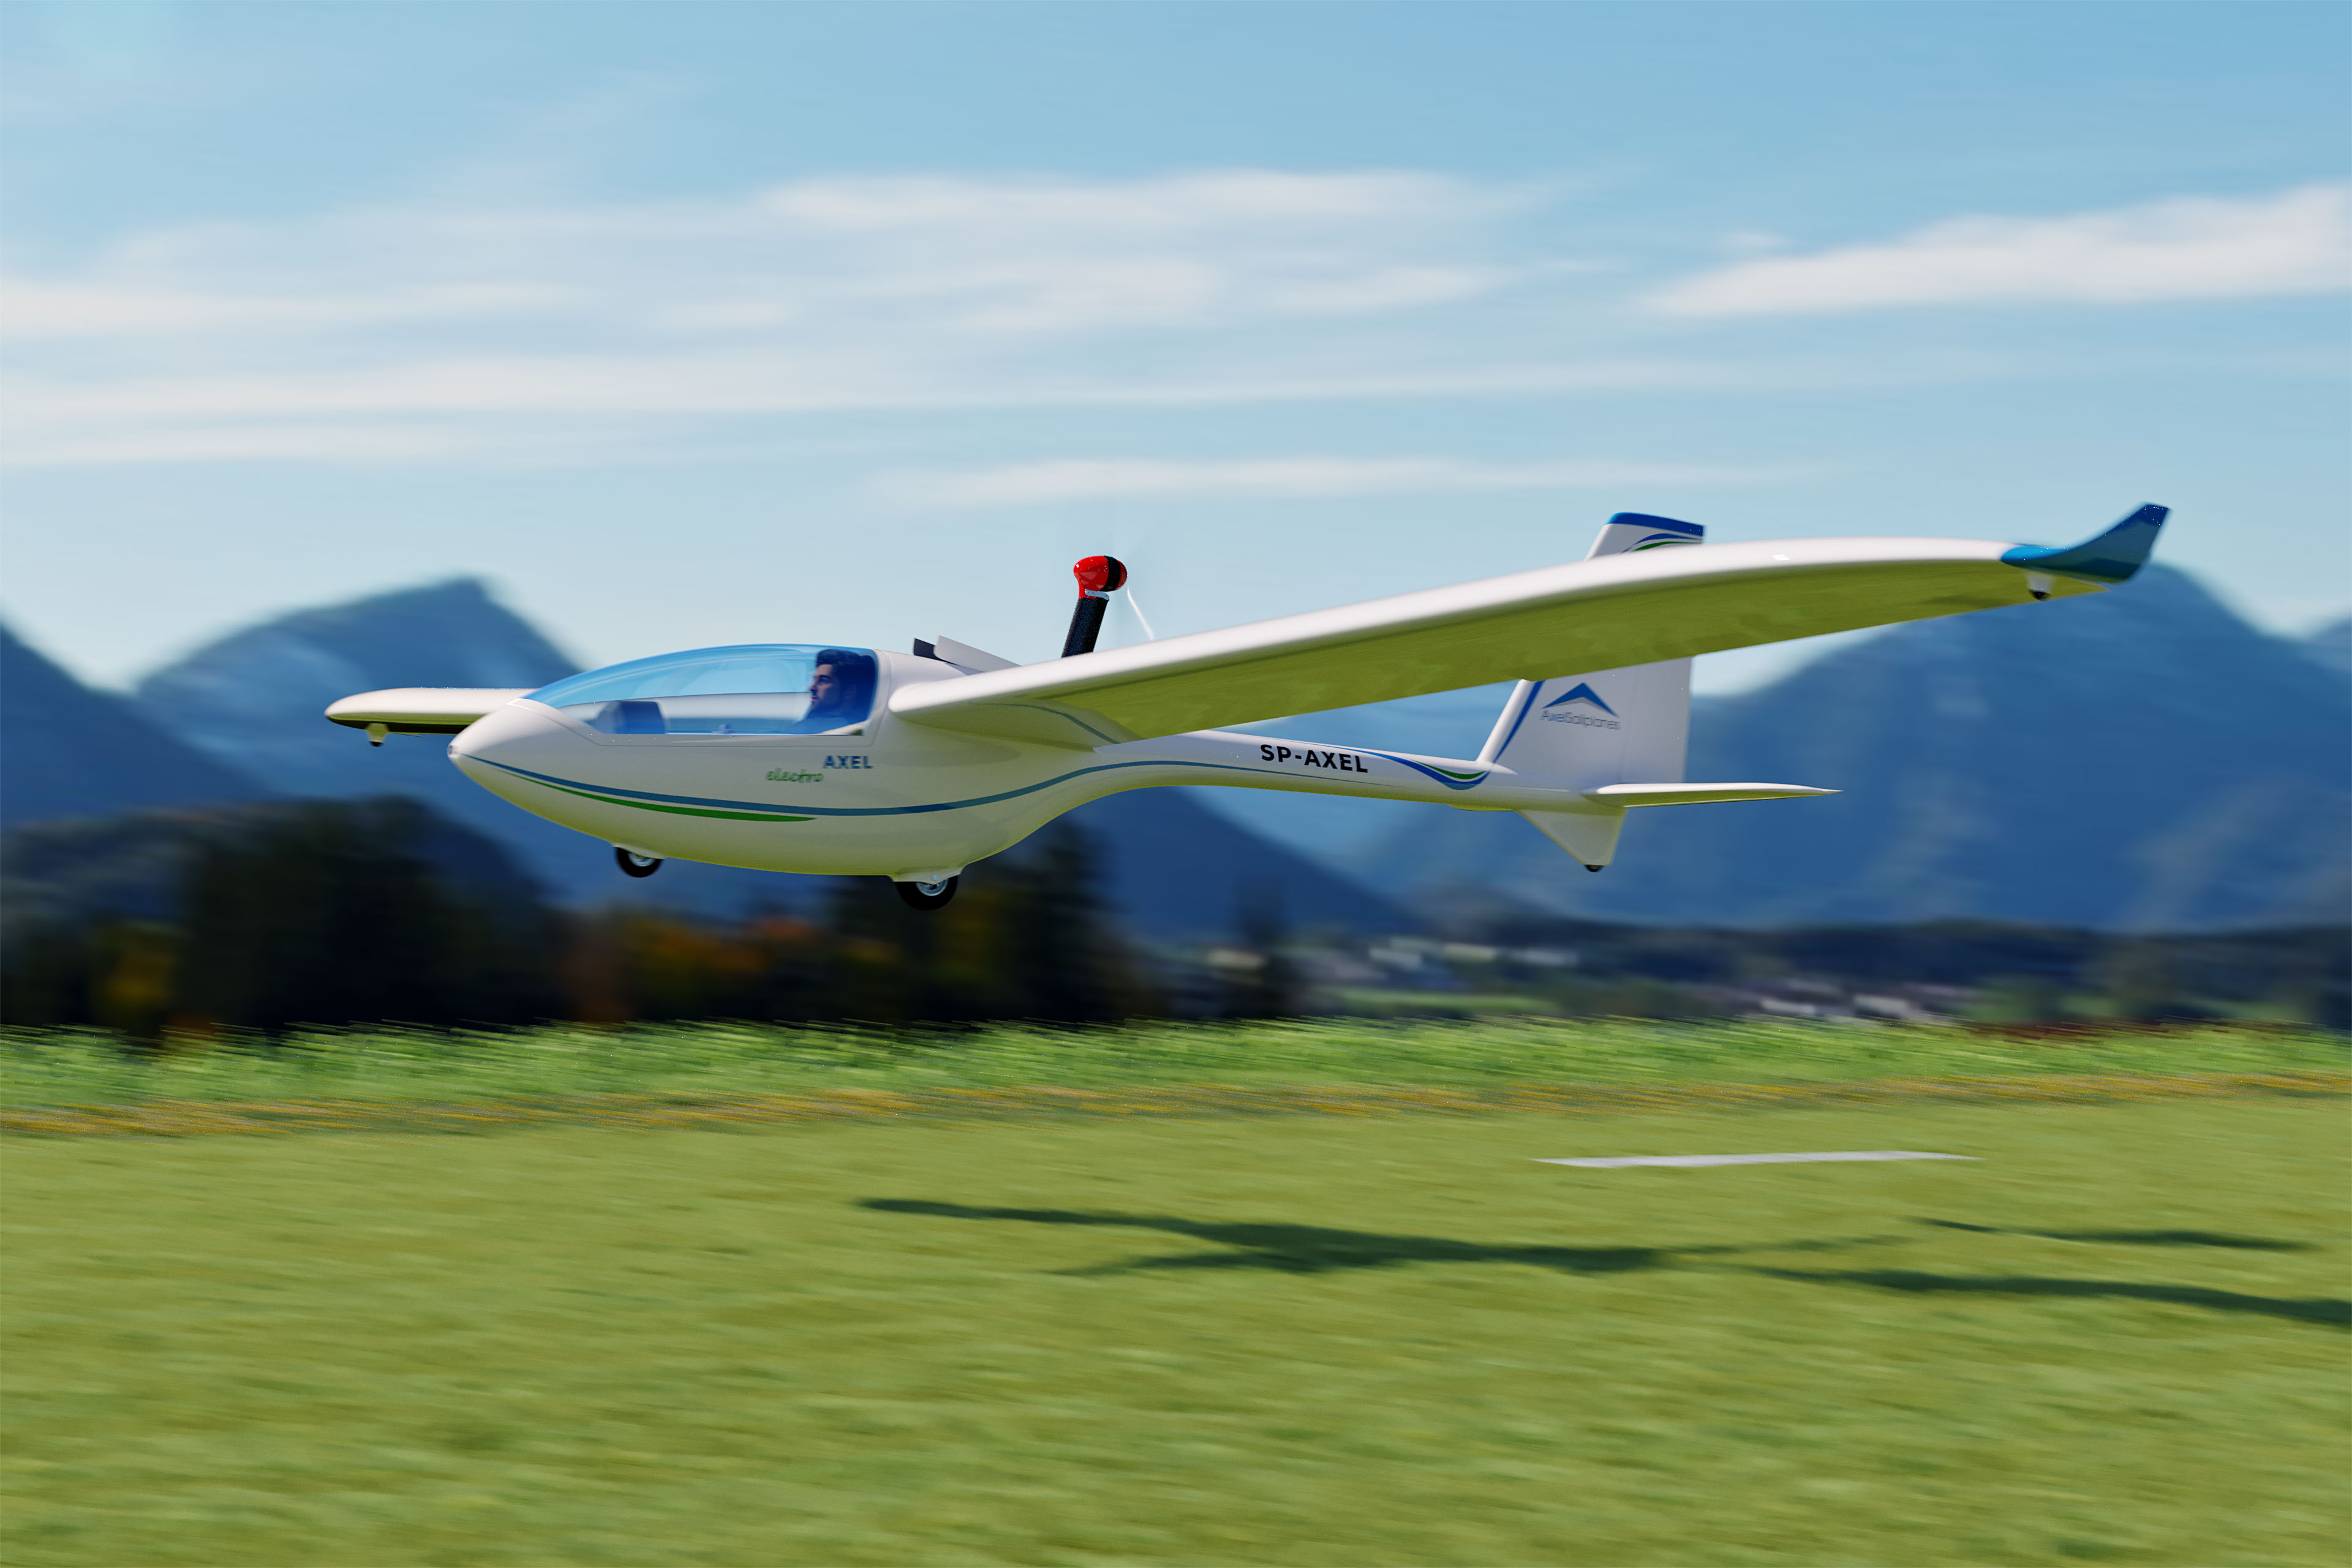 Glider take off with self-launch electric engine.